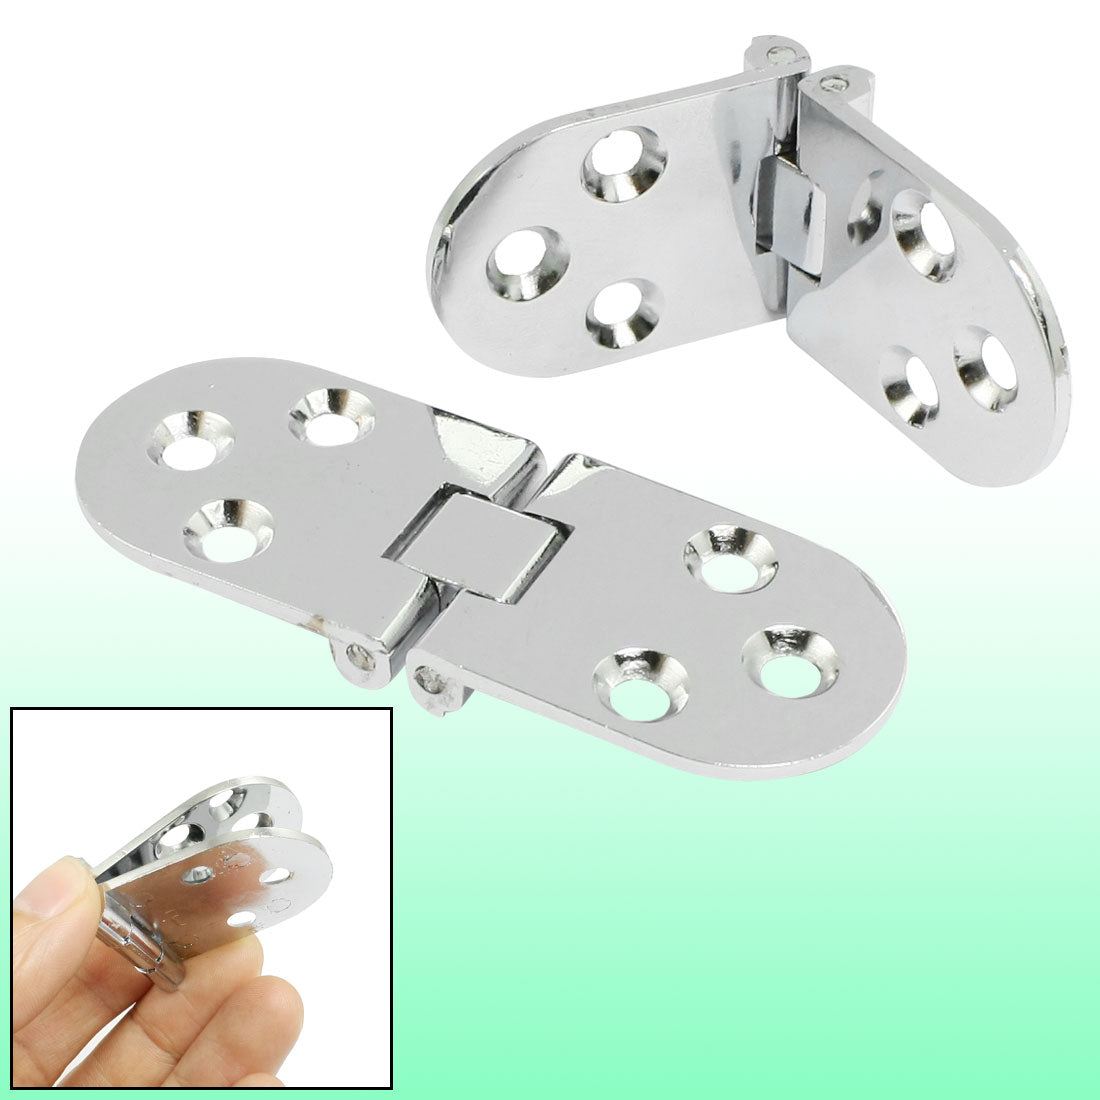 uxcell Uxcell 2 Pcs Silver Tone Metal Foldable Rotary Closet Cabinet Door Hinges 1.2" Length